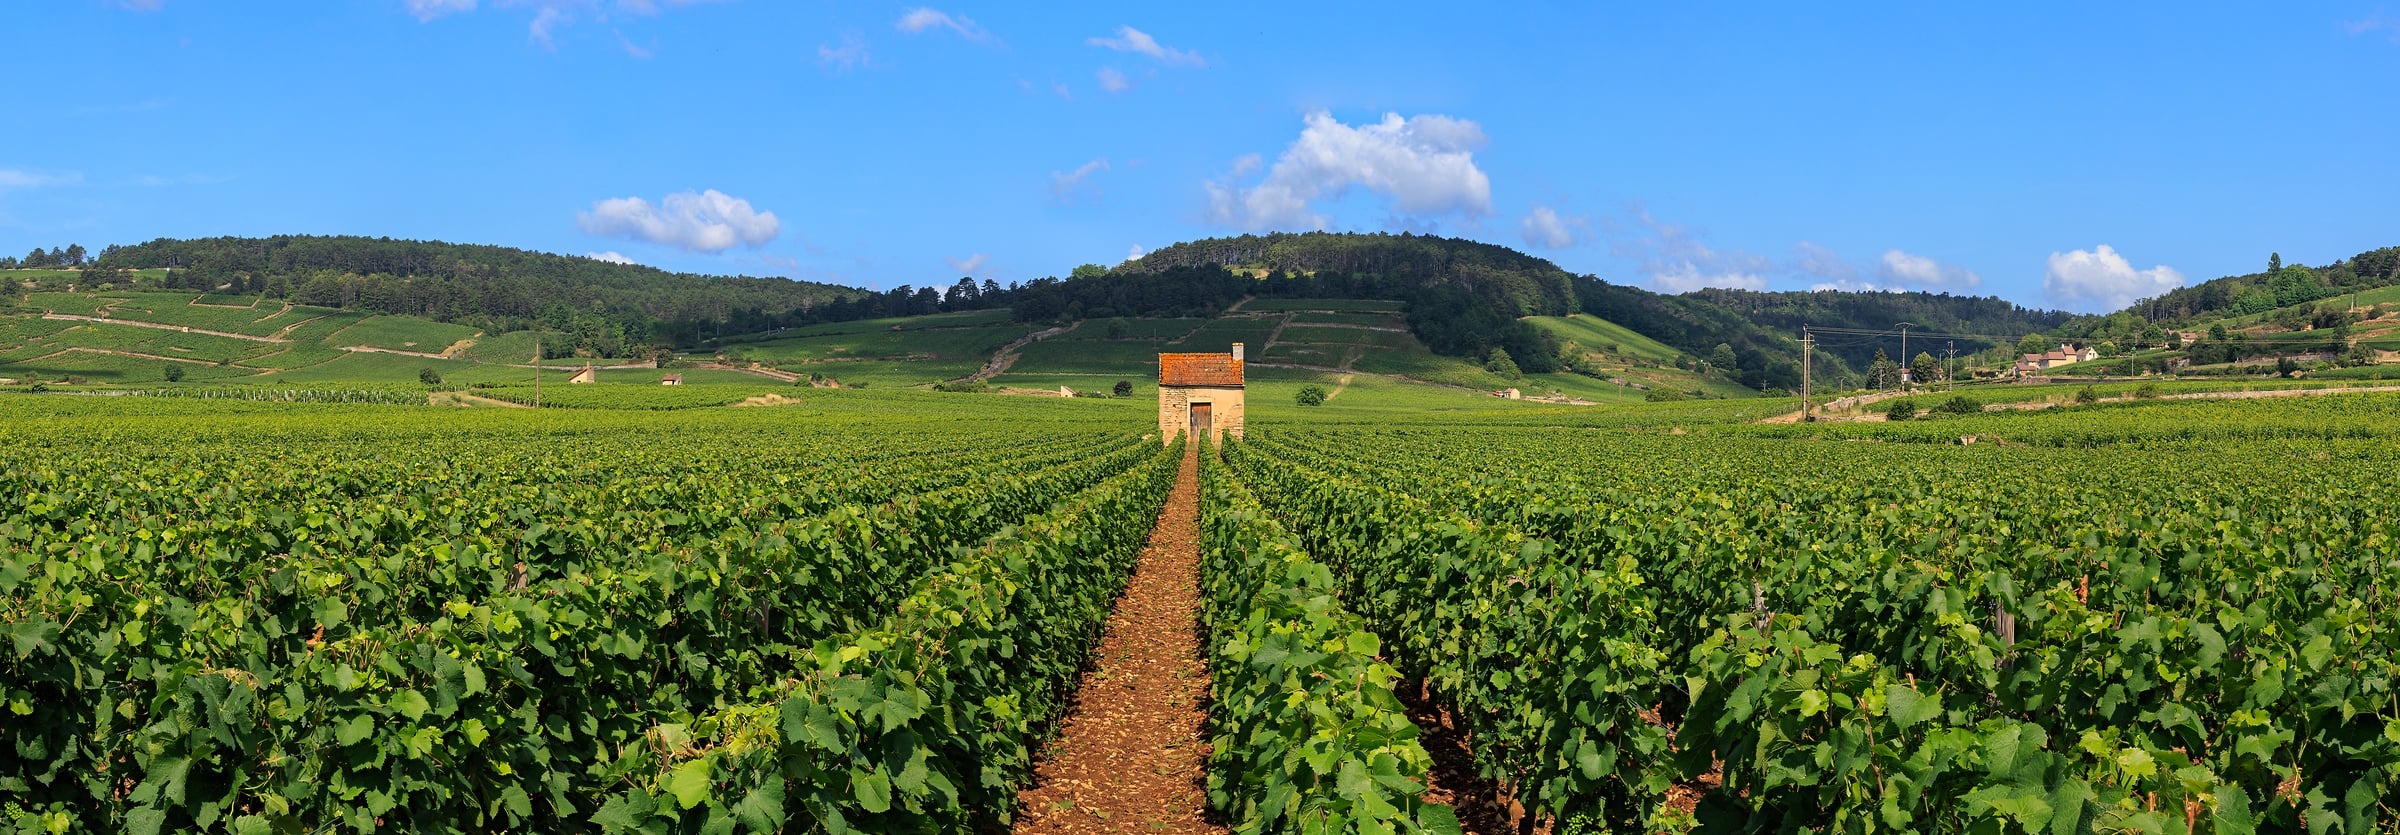 579 megapixels! A very high resolution, large-format VAST photo print of a vineyard in Burgundy, France; photograph created by Scott Dimond in Belissand Beaune Premier Cru, Beaune, Côte-d'Or, France.